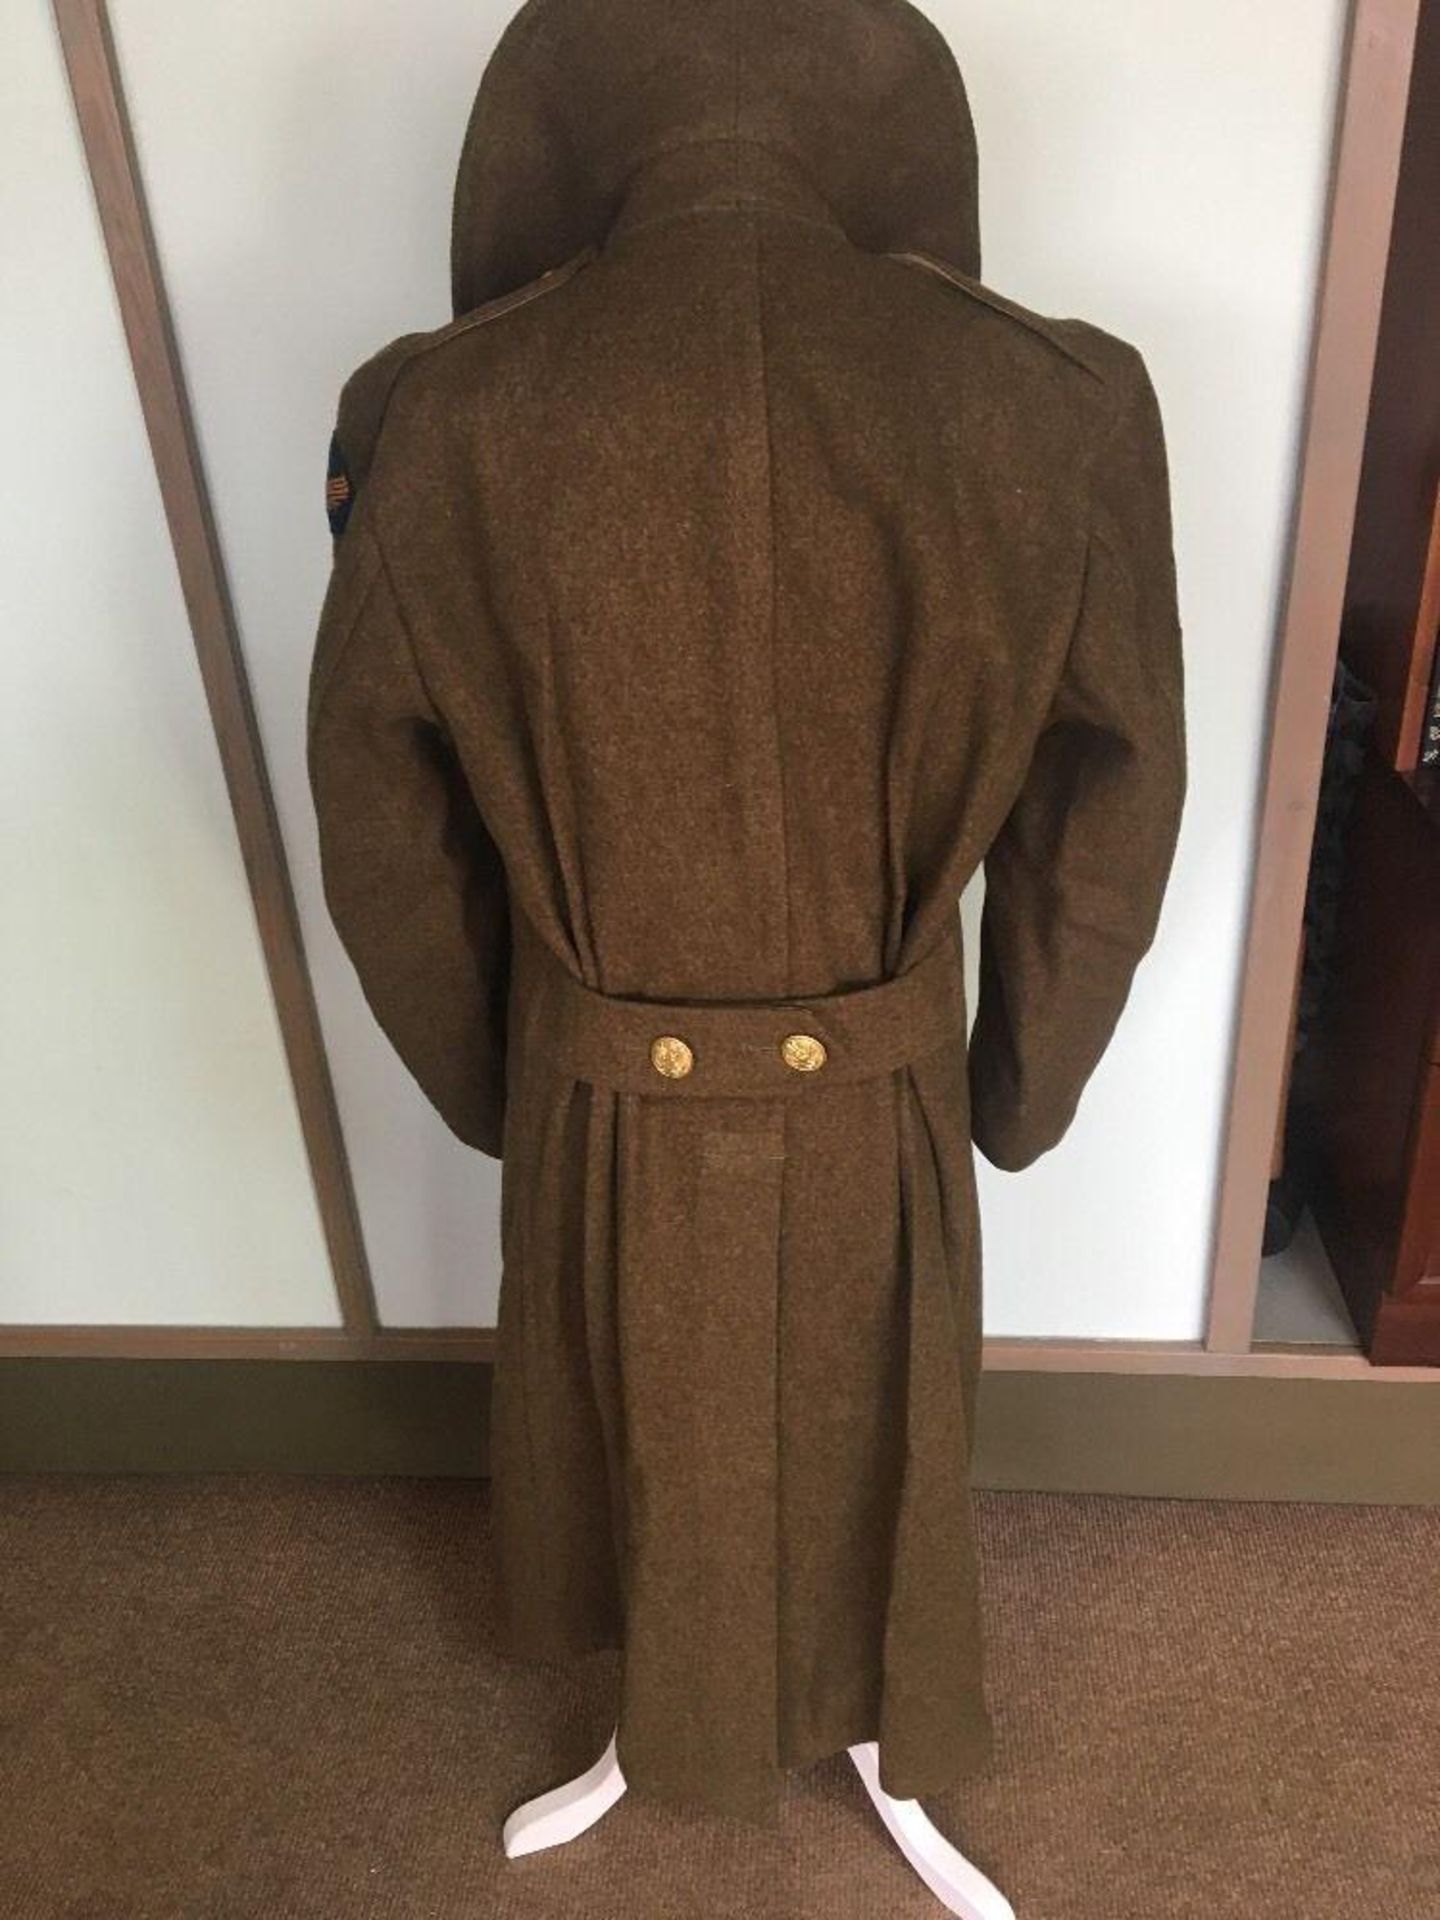 1940s WW2 US Air Force Men's Wool Long Trench Coat Olive Green. Size 34R. Dated 3/11/1940. A genuine - Image 6 of 7